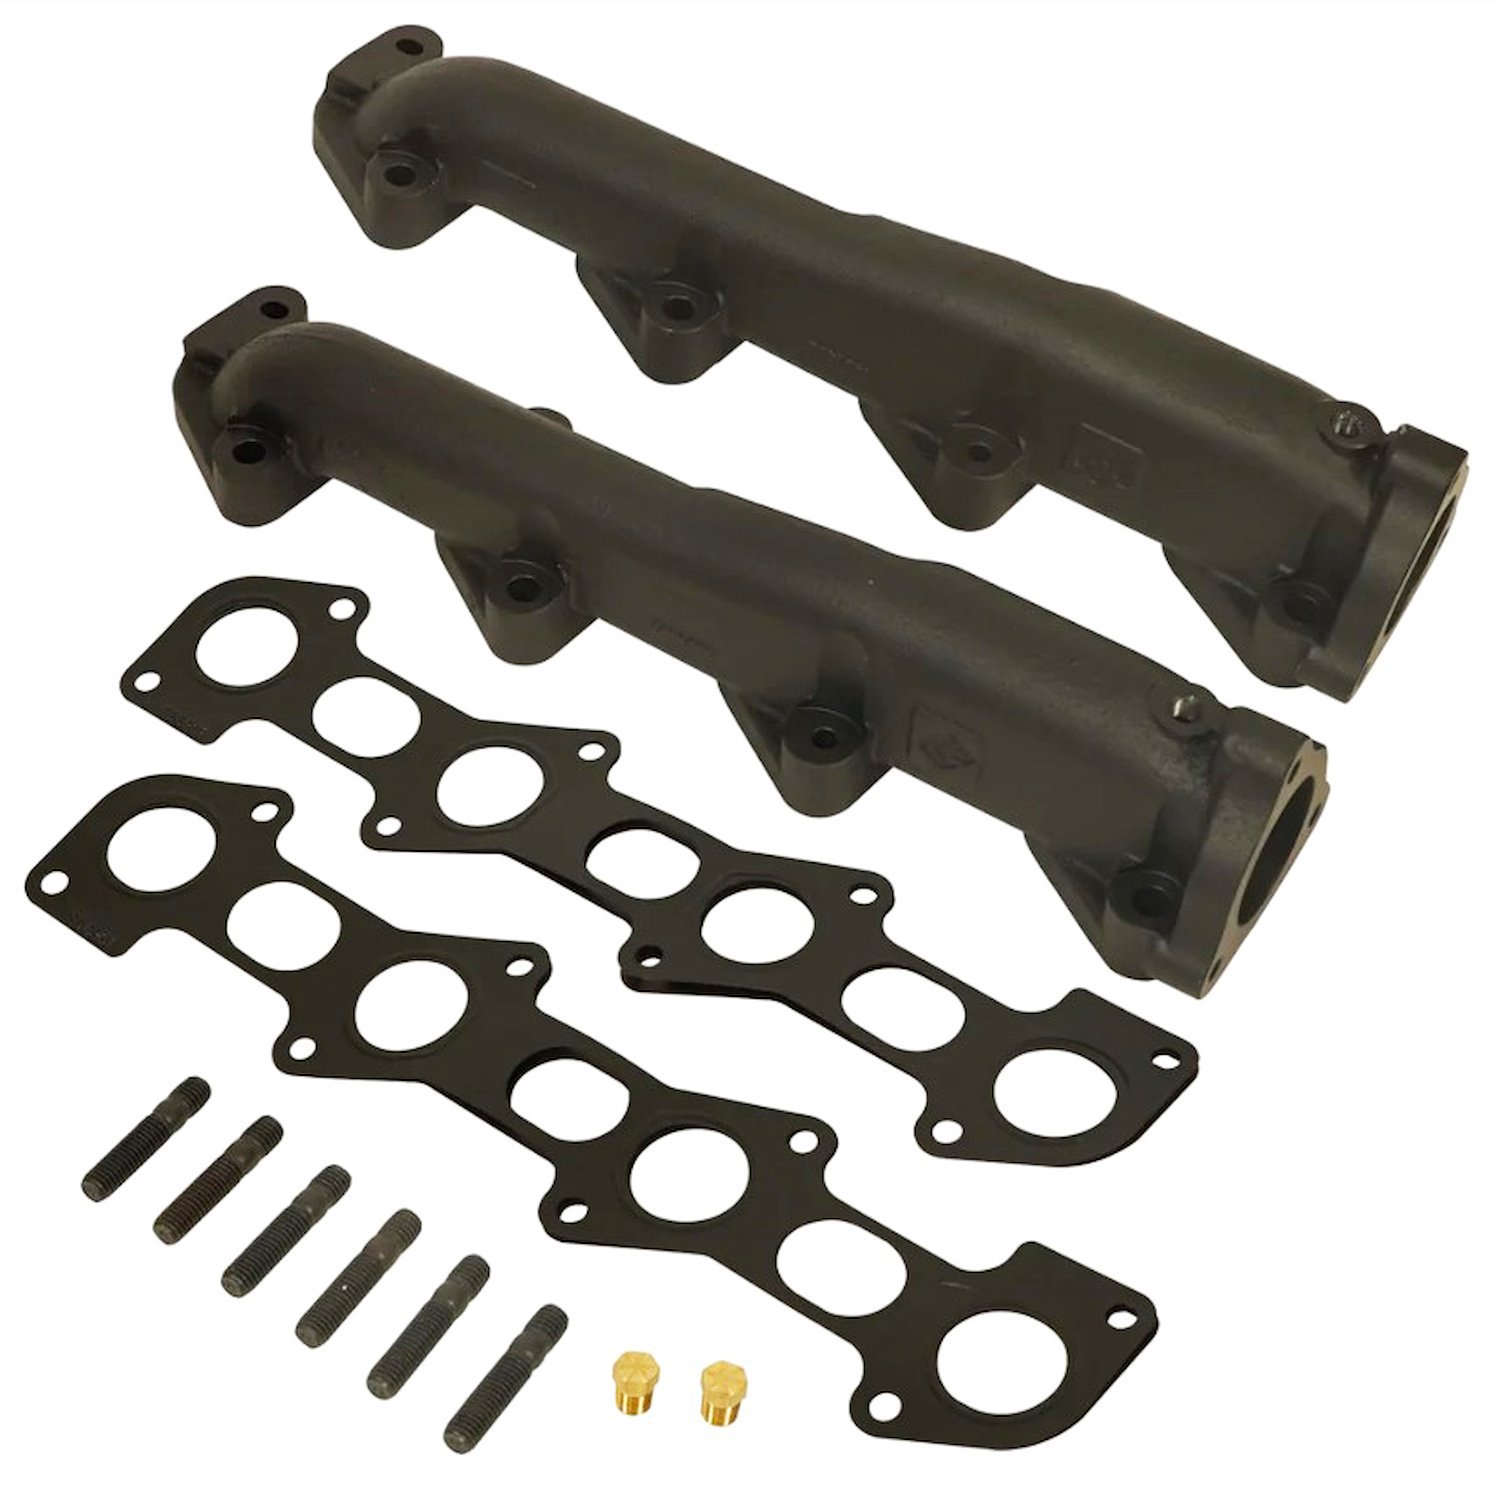 Exhaust Manifold Kit for 2008-2010 Ford 6.4L Power